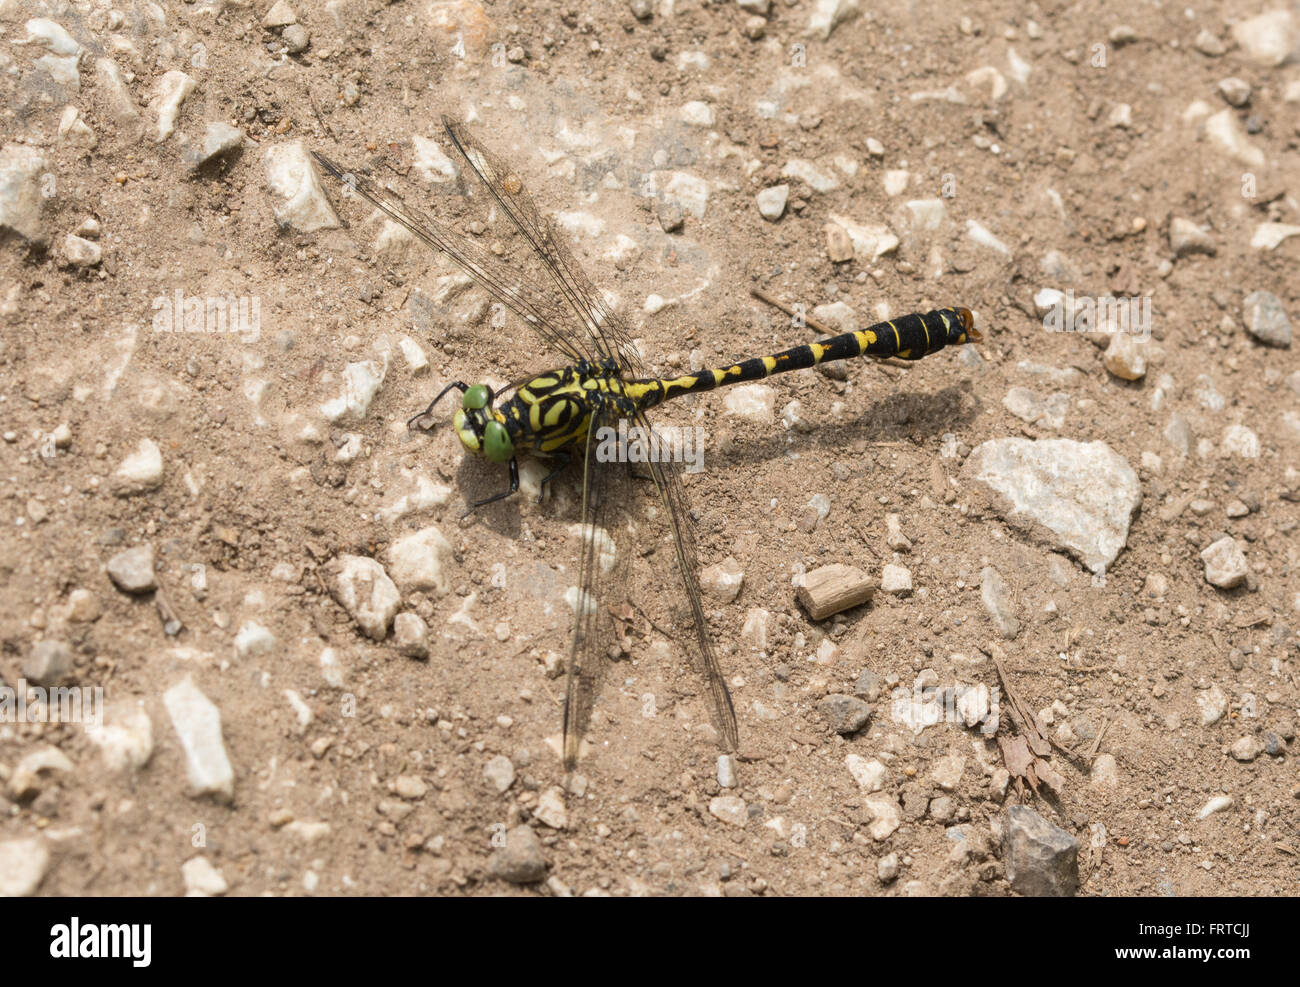 Club-tailed dragonfly sul terreno in Aggtelek National Park, Ungheria Foto Stock